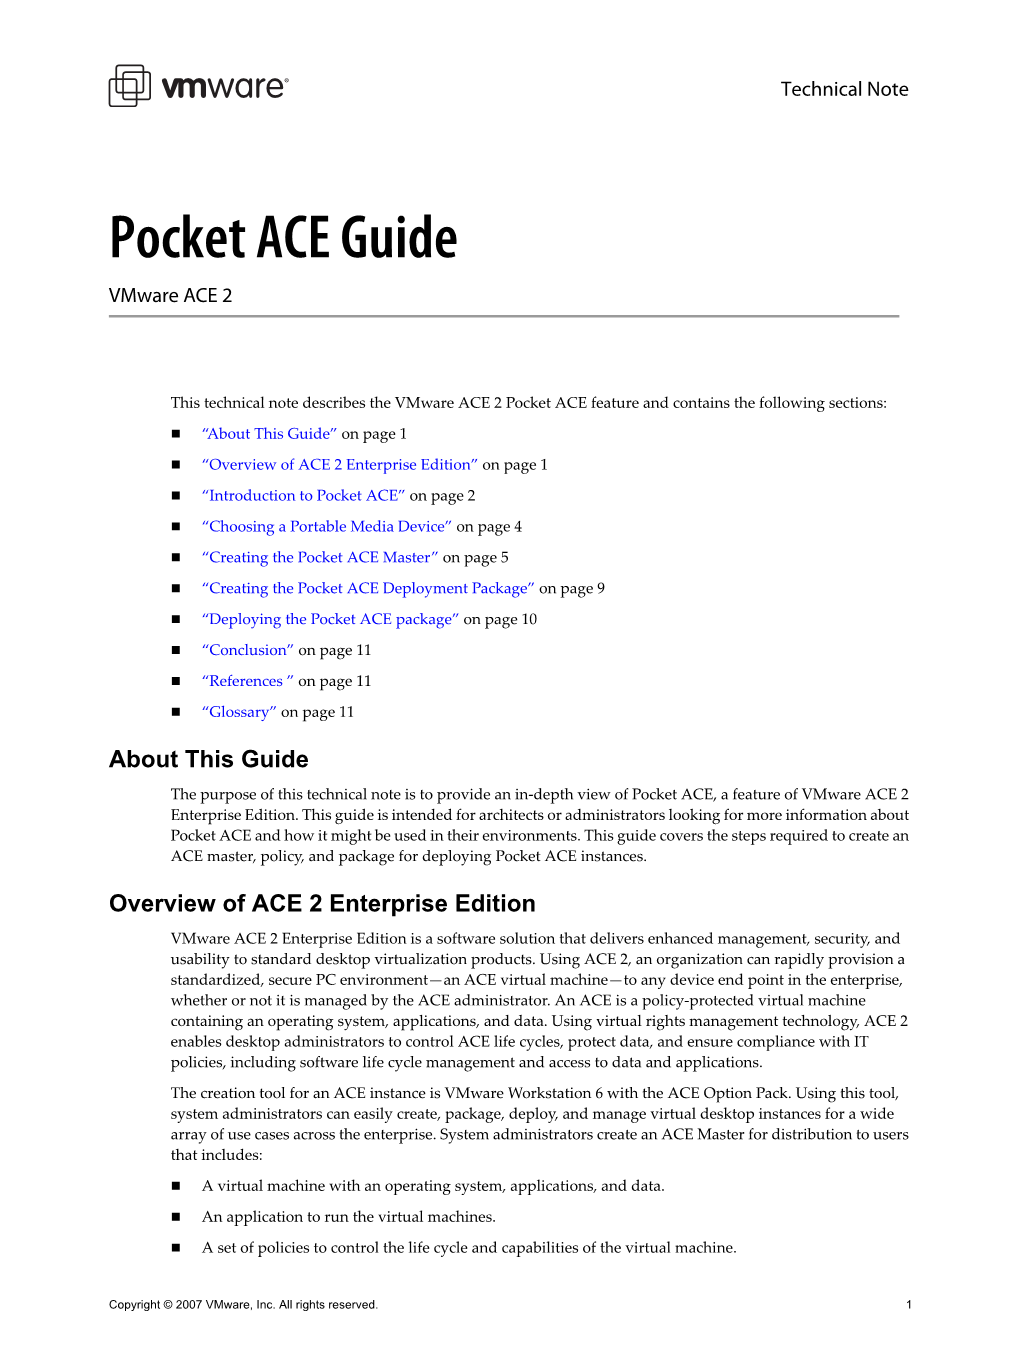 Pocket ACE Guide Vmware ACE 2